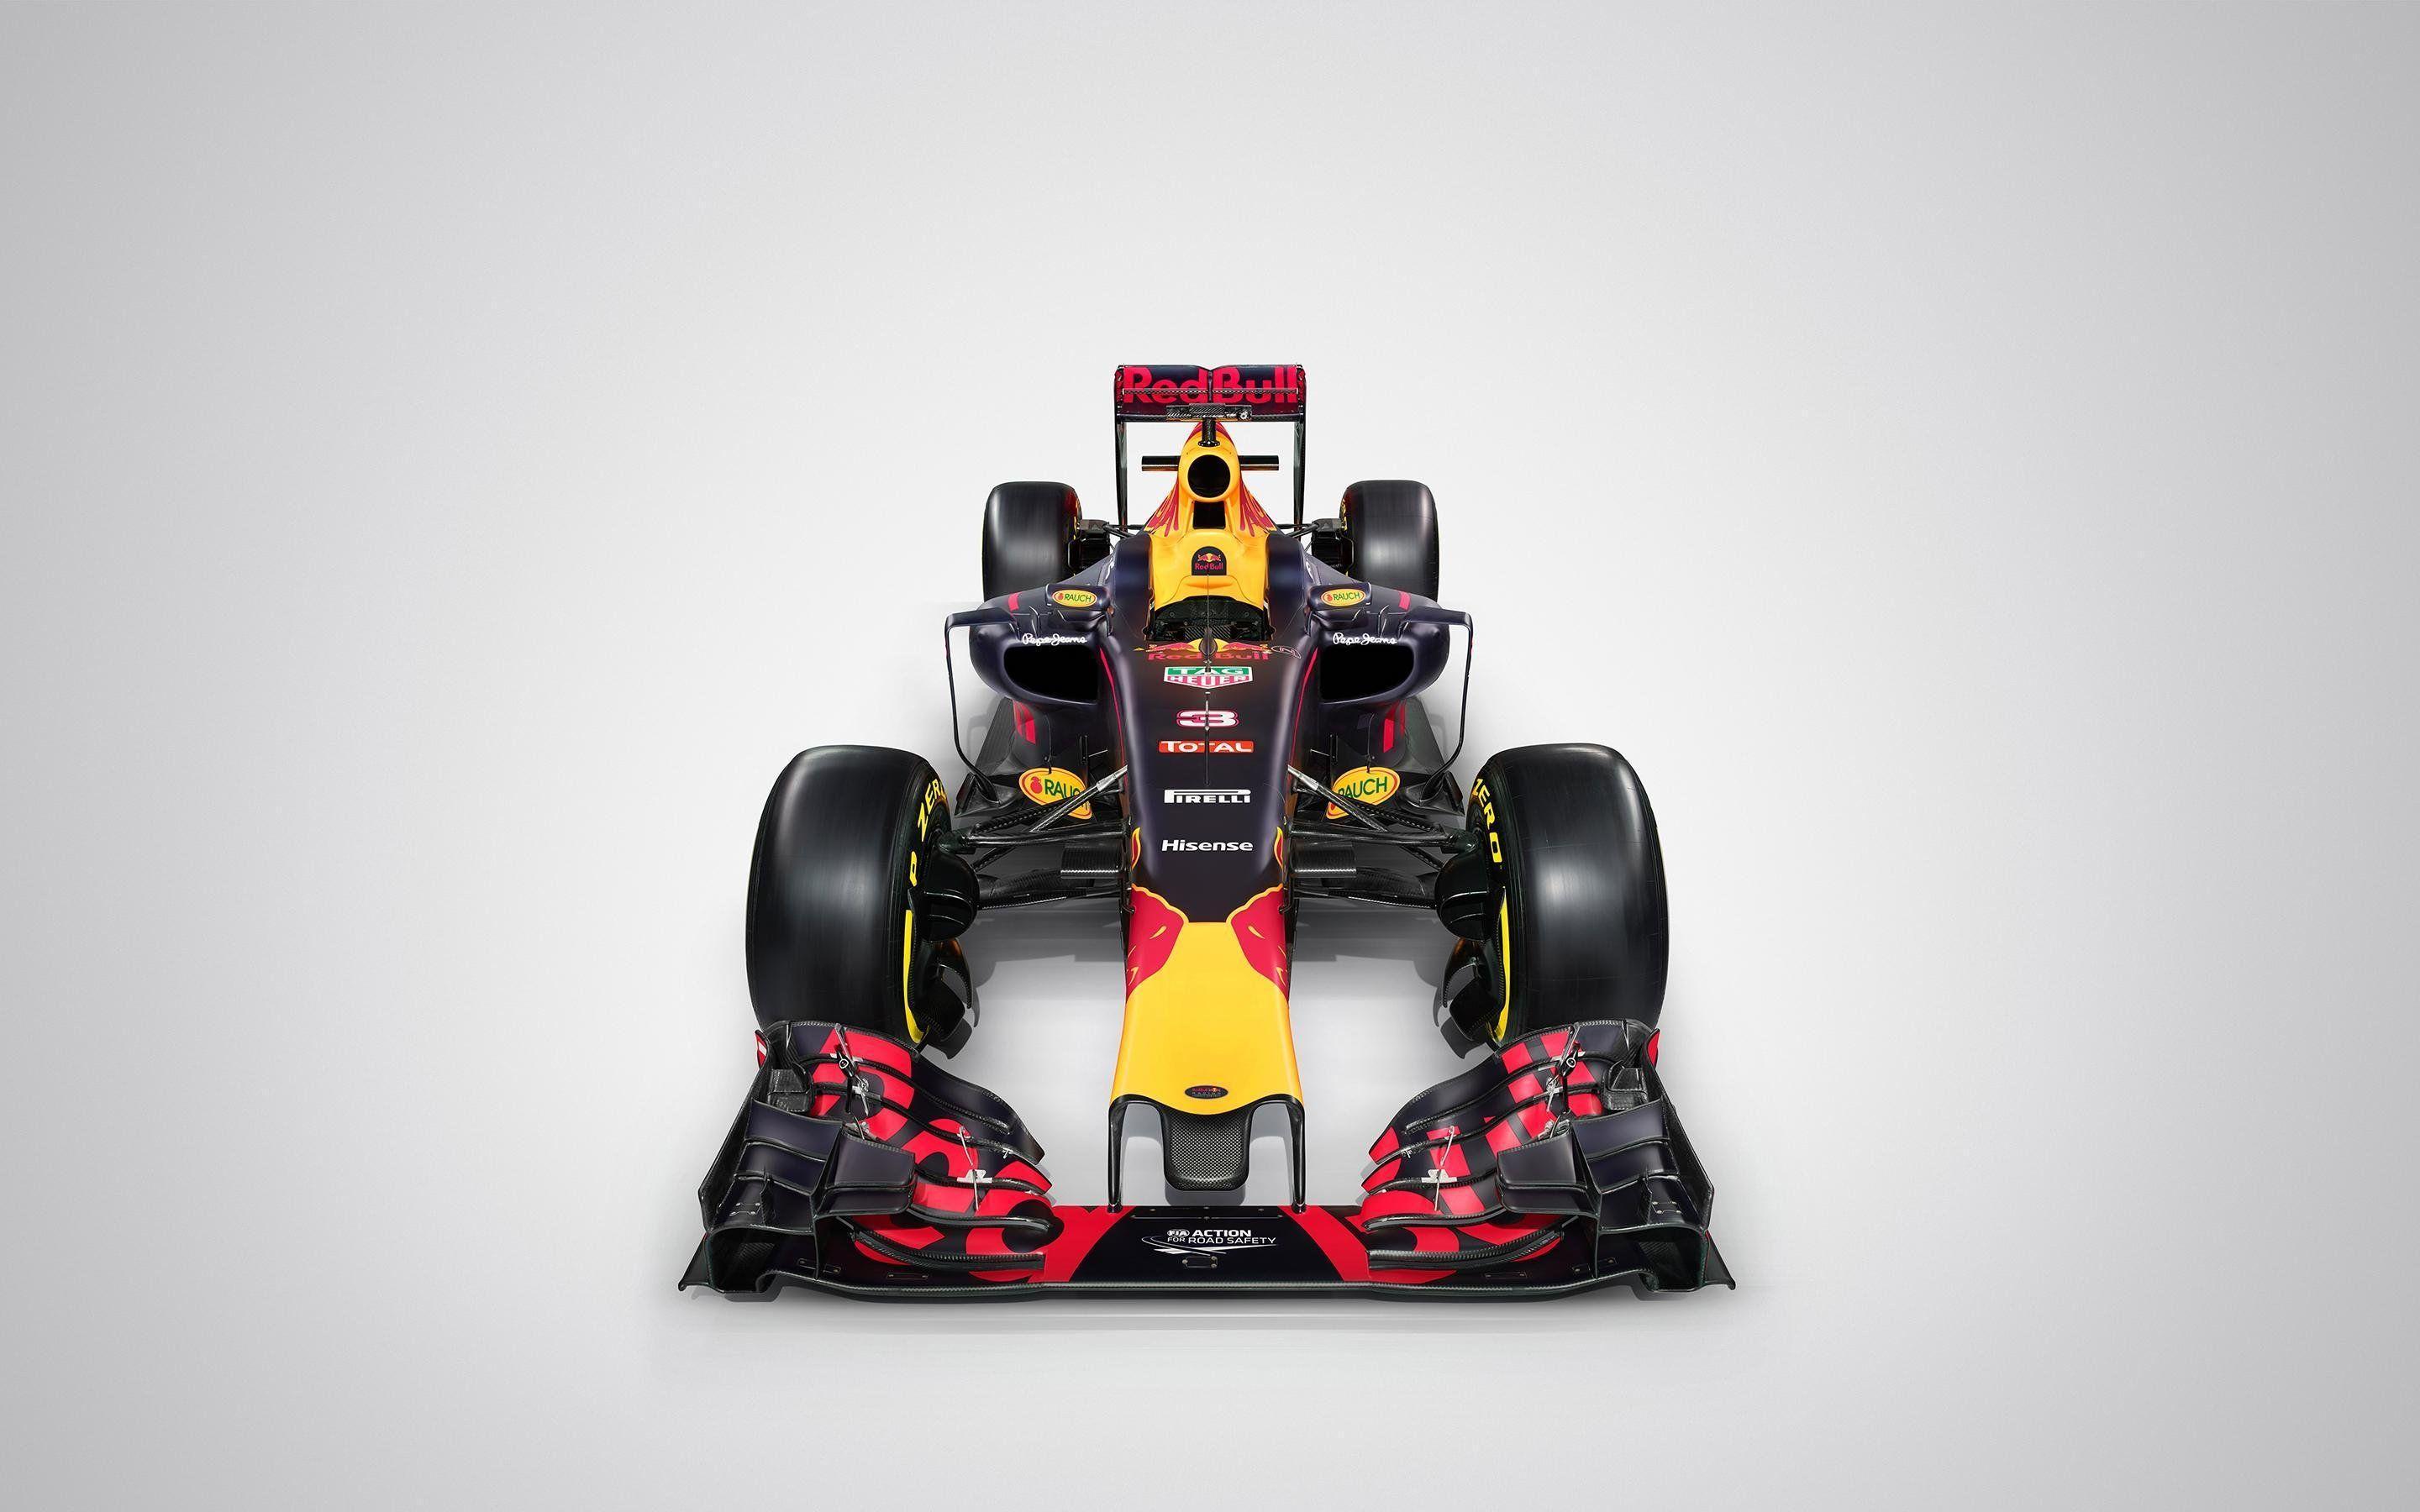 A better look at Red Bull Racing&;s RB12 livery. Scrutinize